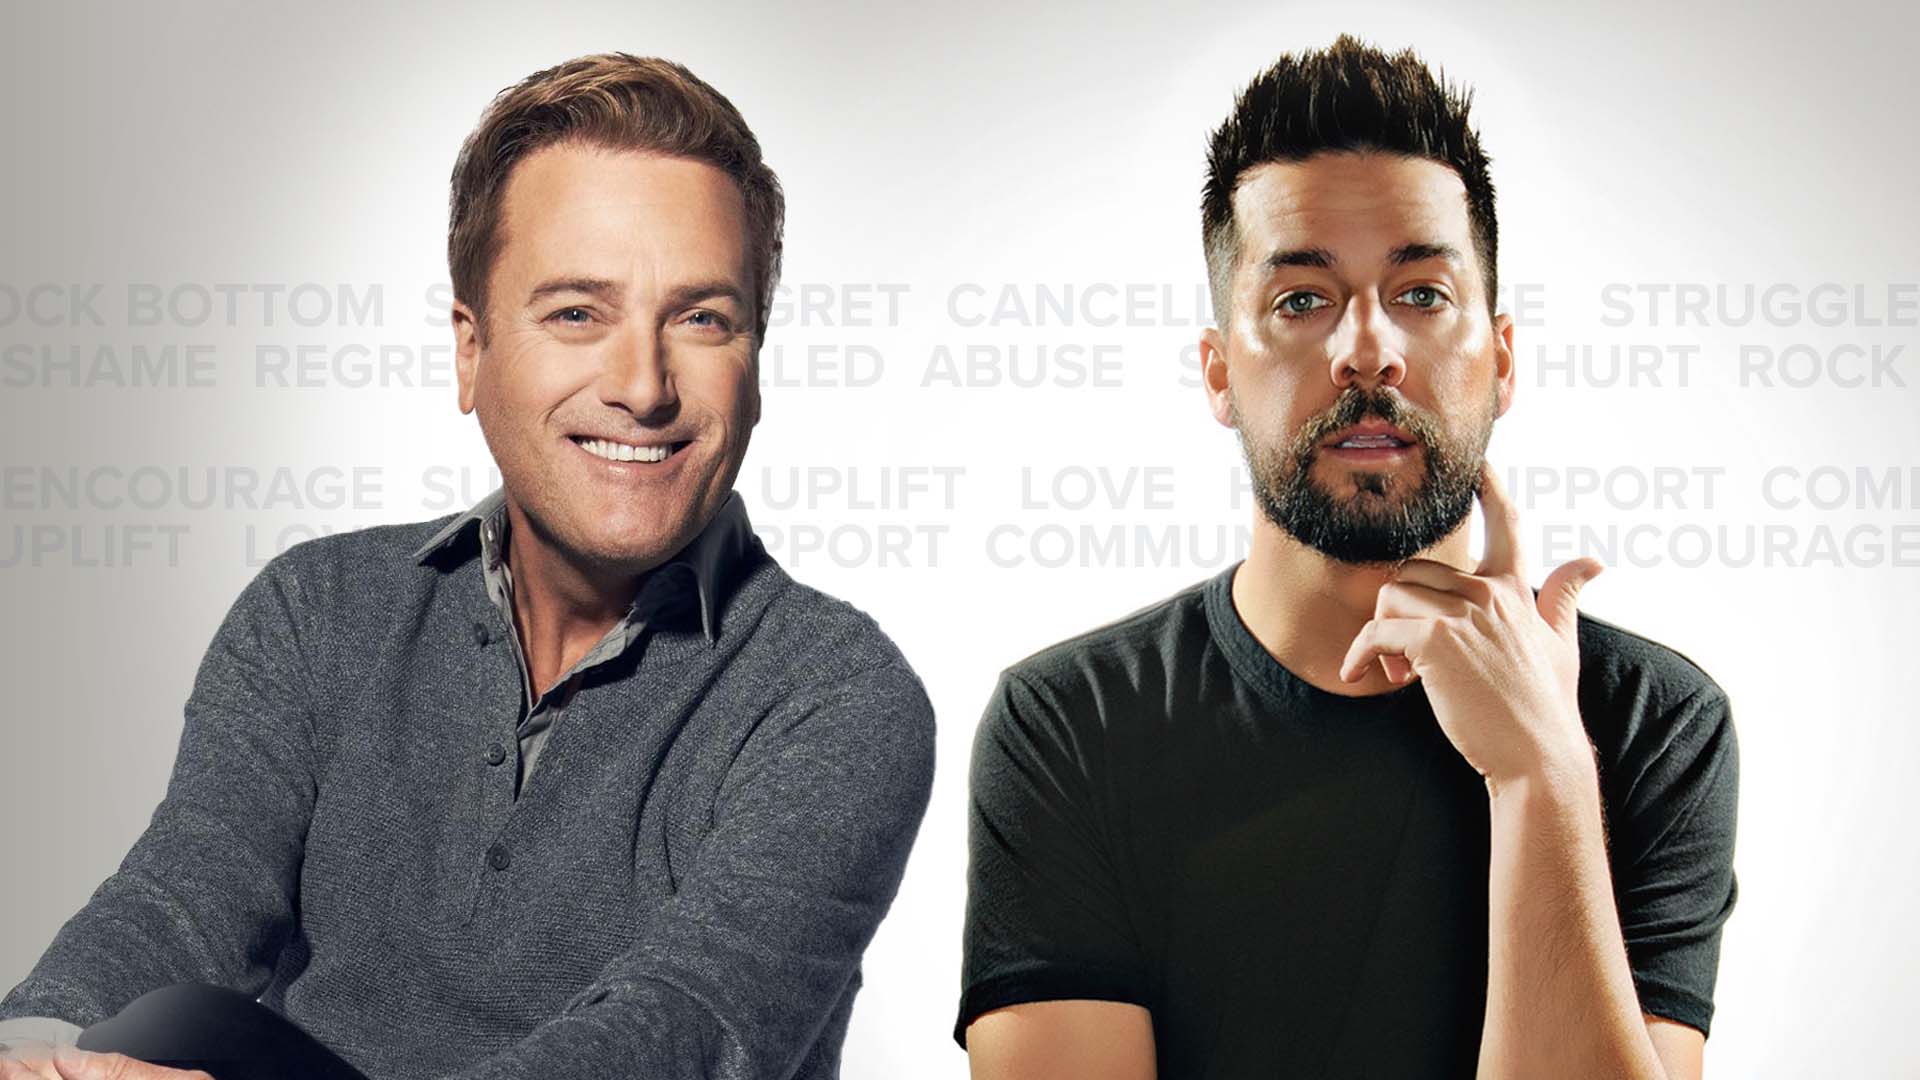 John Crist and Michael W. Smith Share Their Struggles With Substance Abuse and Shame